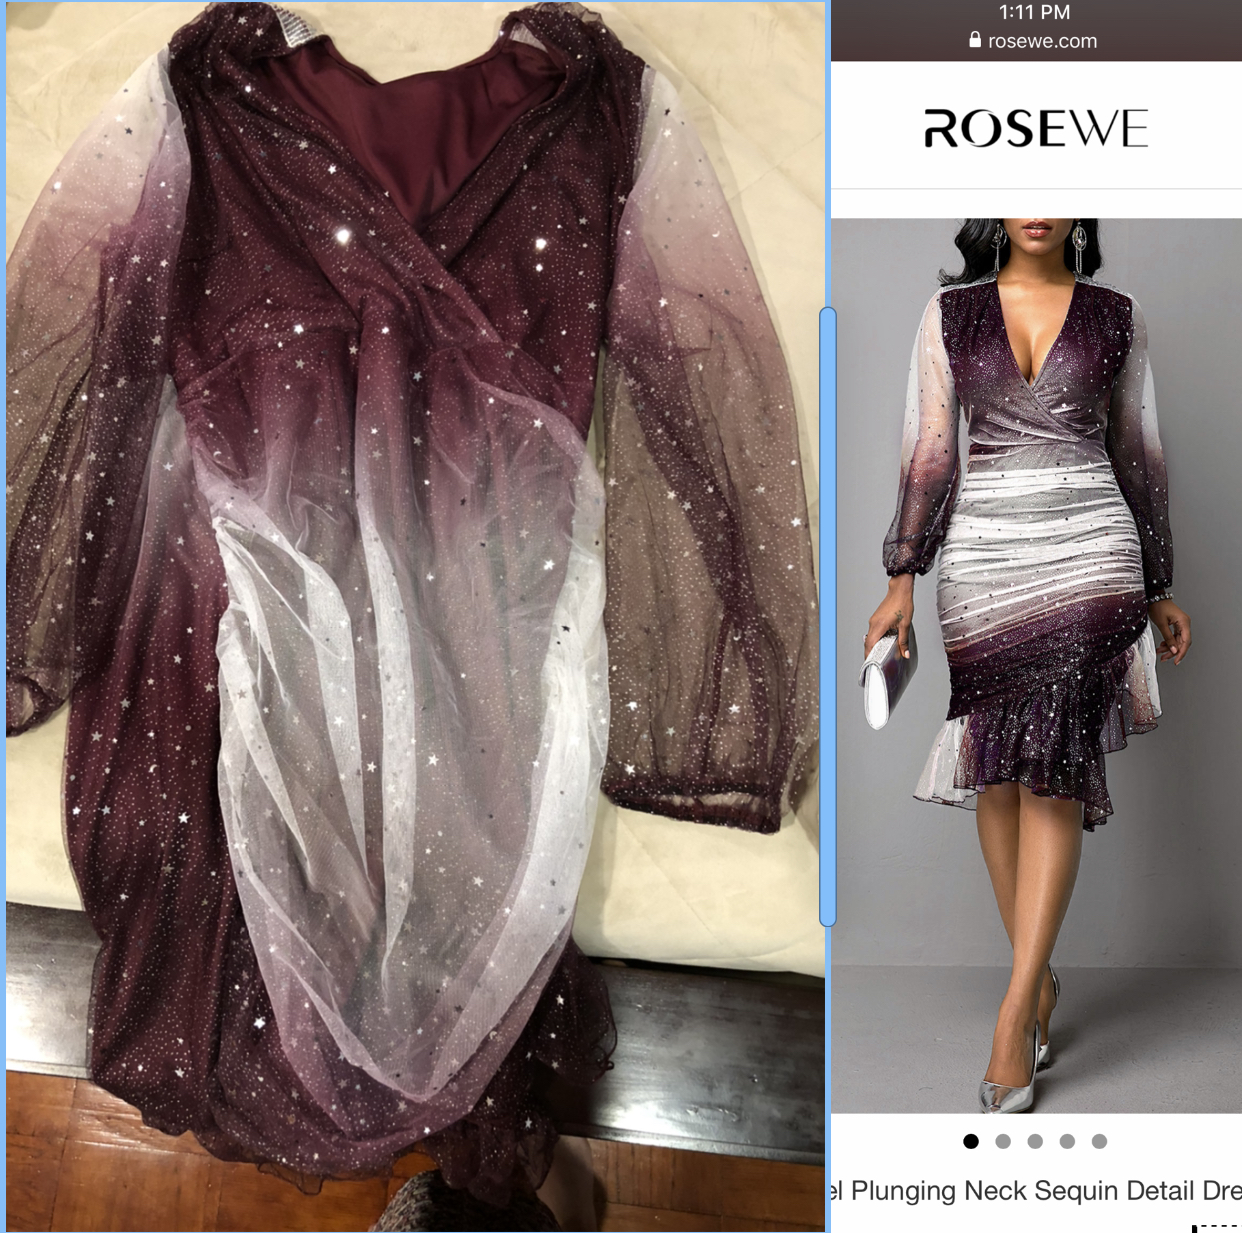 dresses from rosewe